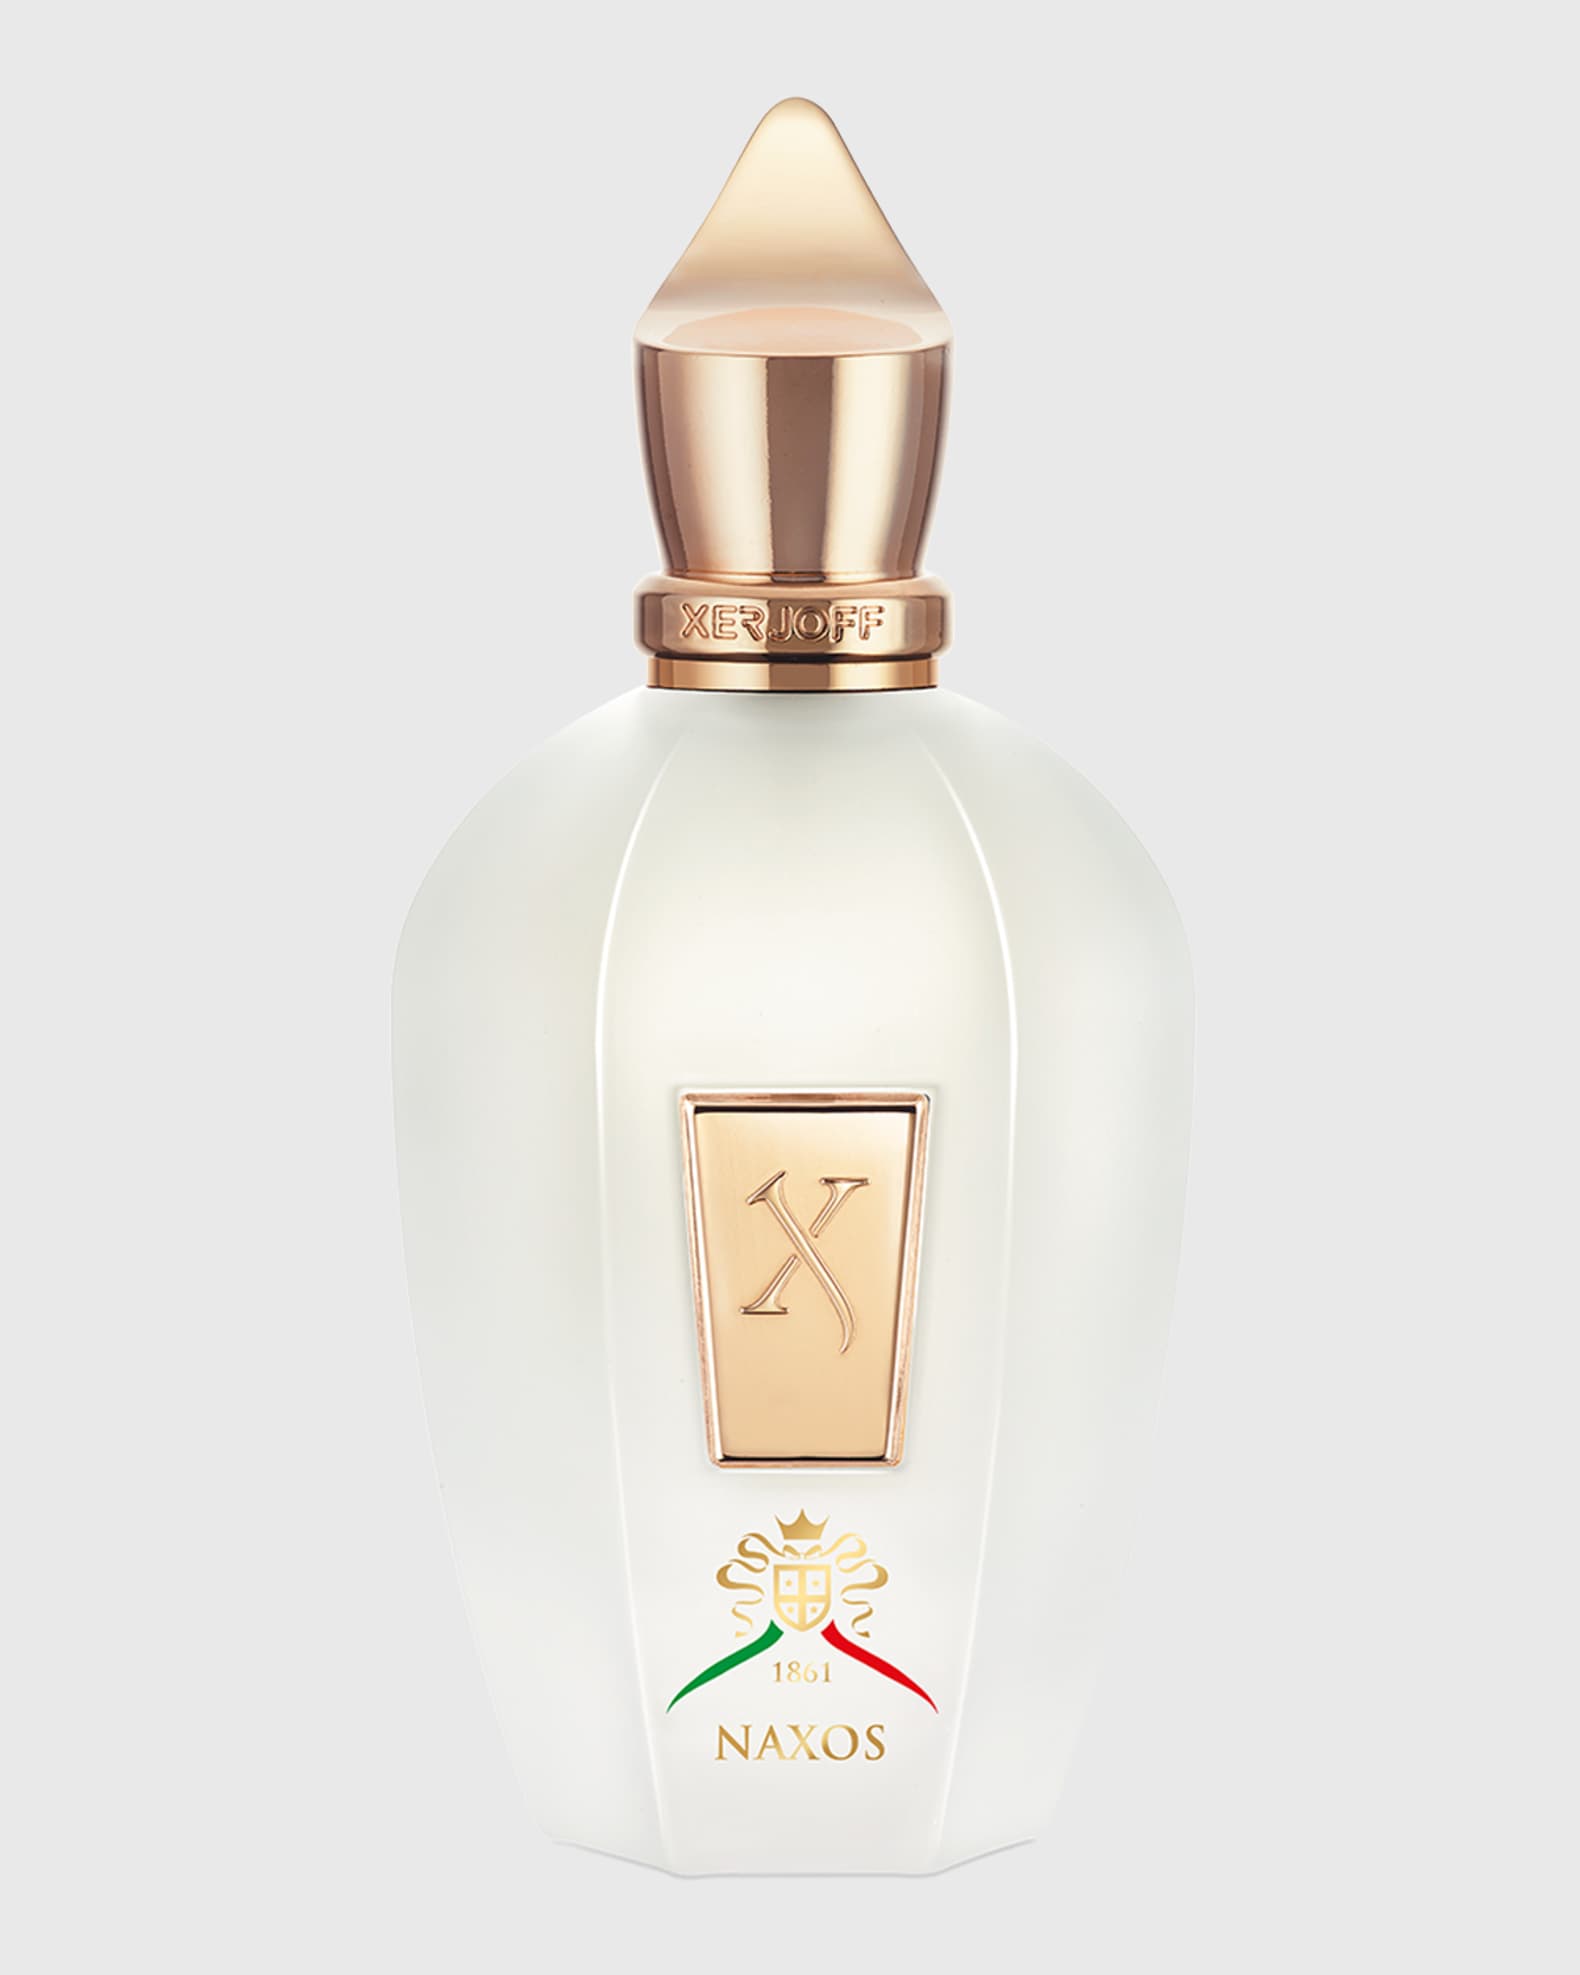 The golden state in a bottle - Louis Vuitton Les Colognes